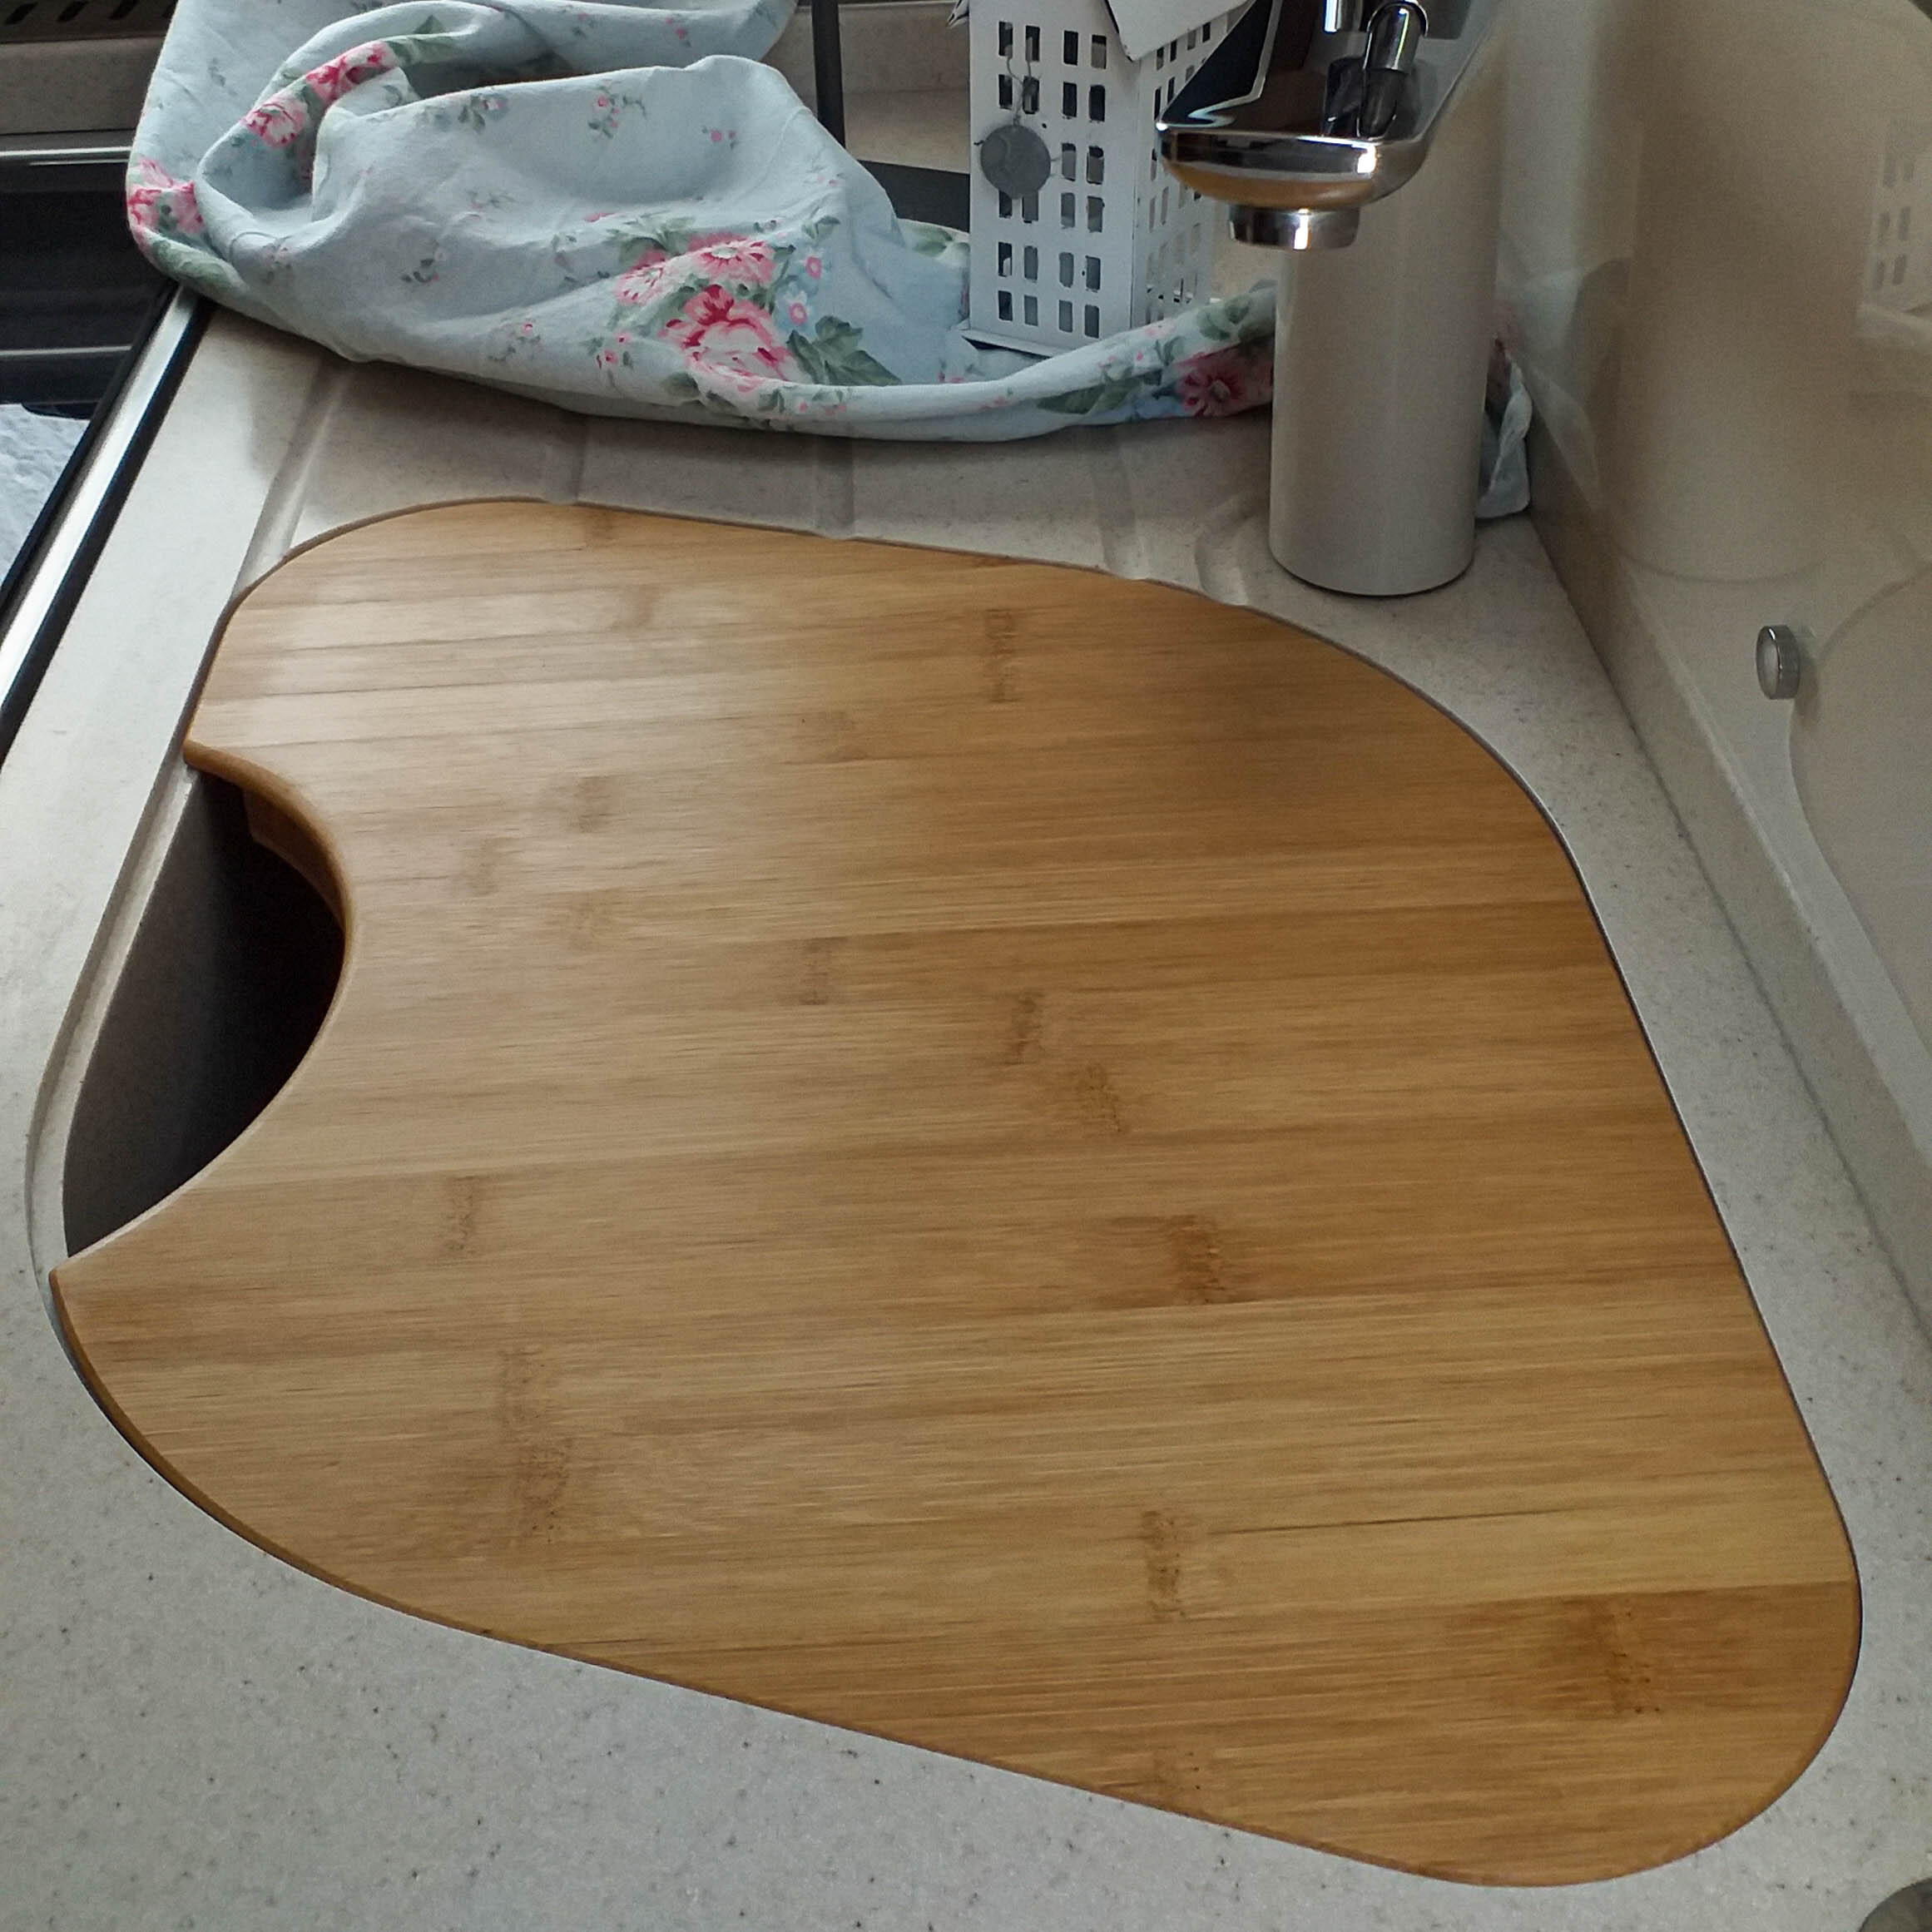 Cutting board with sink cover for Hymer models without round sink